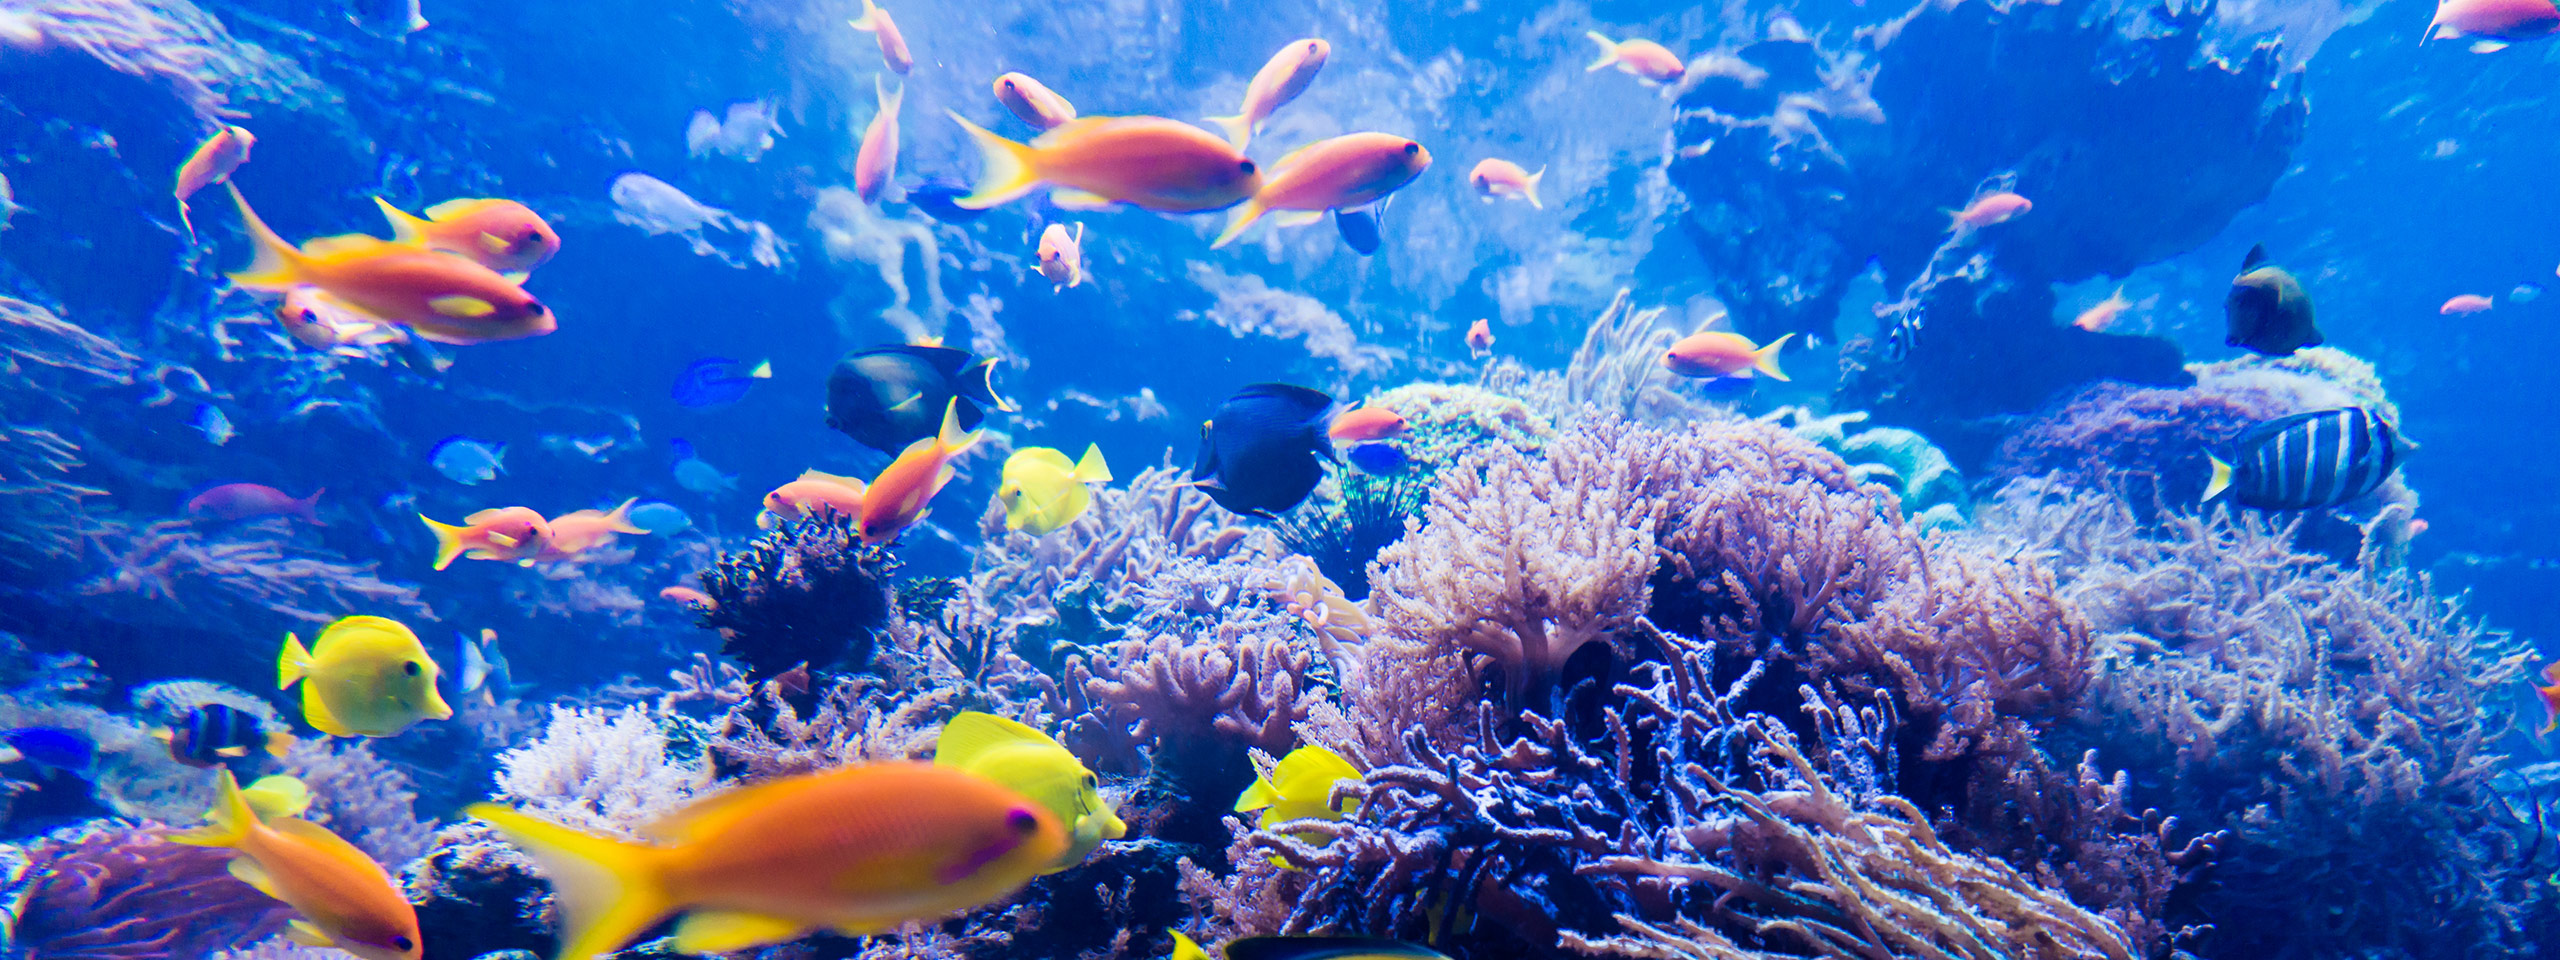 Colourful Fish and Coral, Great Barrier Reef